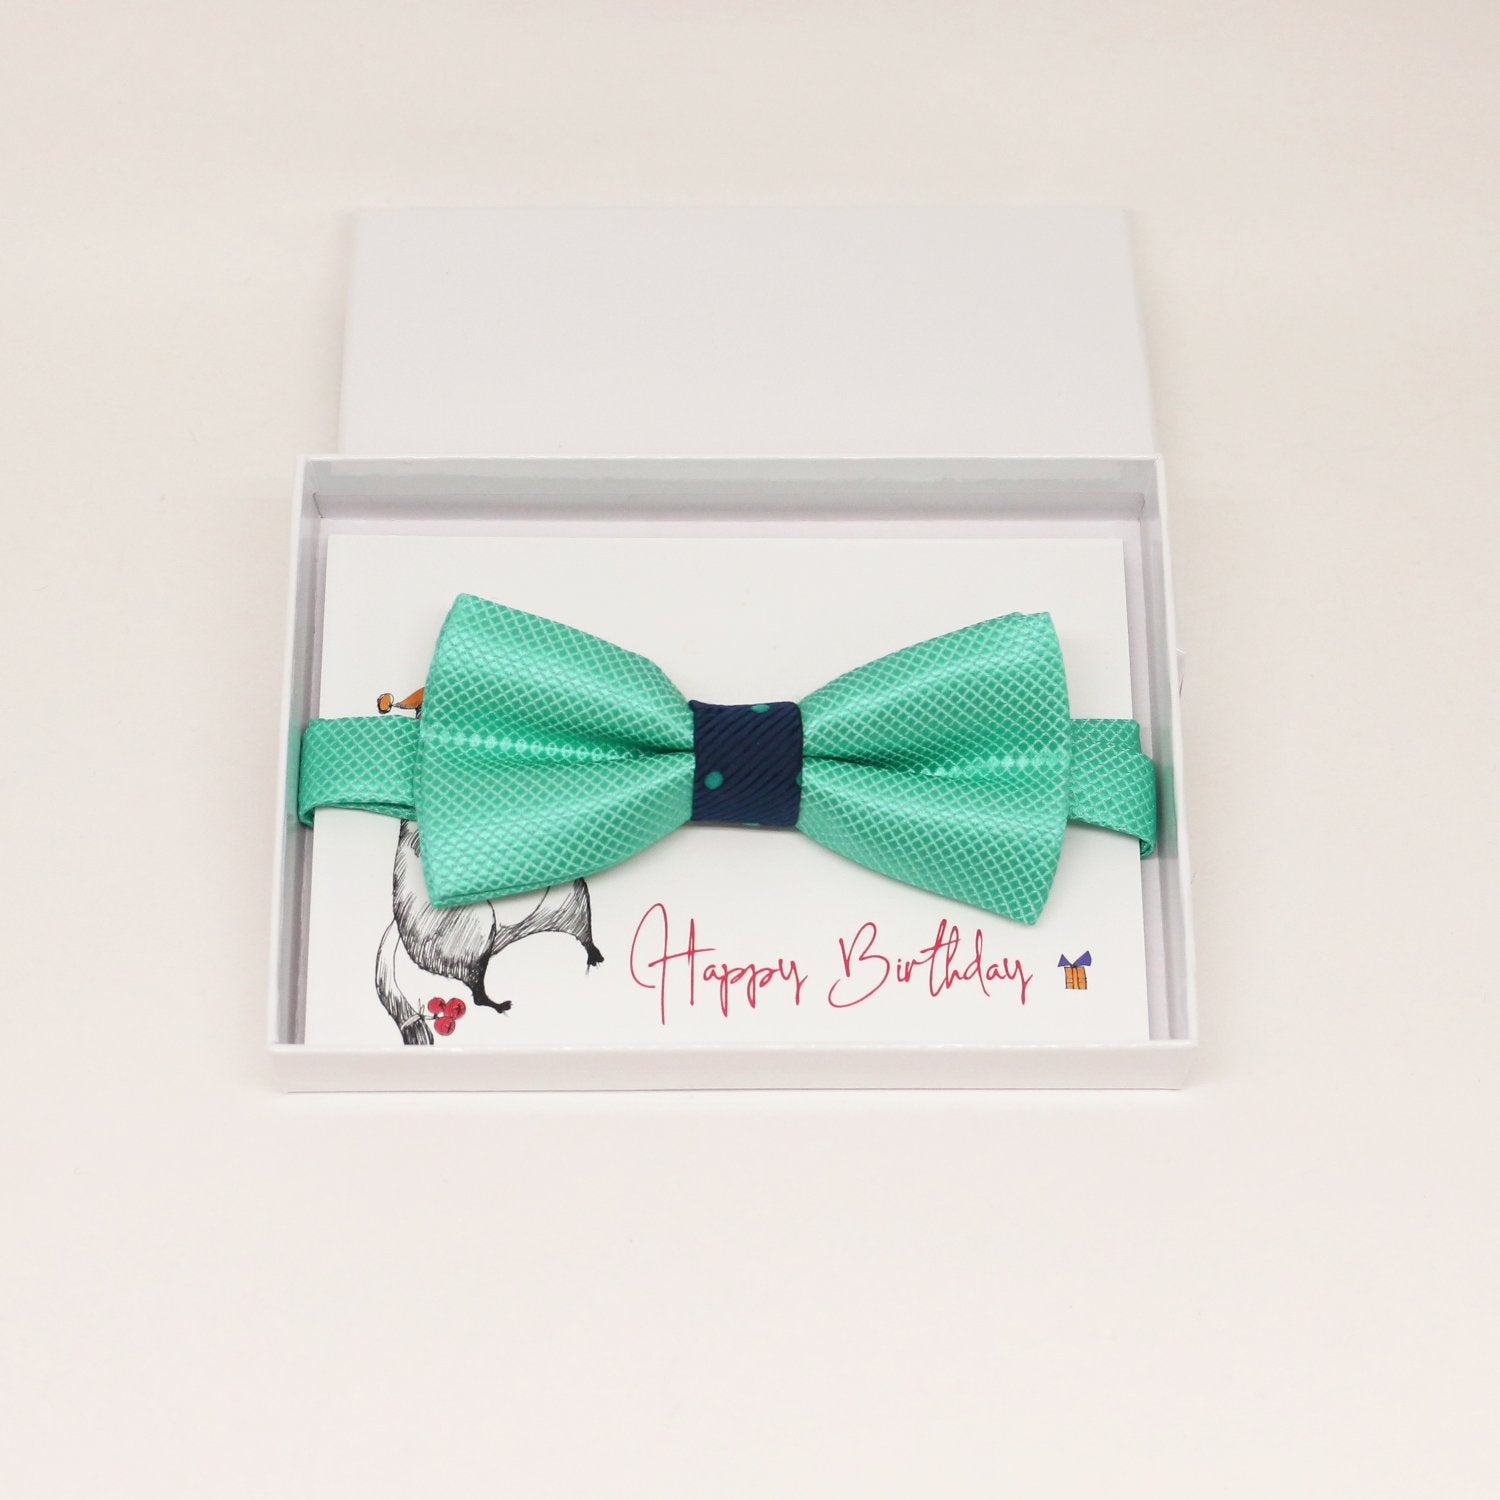 Turquoise kids Bow Ties, ring bearer bow tie, Happy Birthtday card, congrats, congrats grad, Ring bearer request gift, Turquoise kids bow